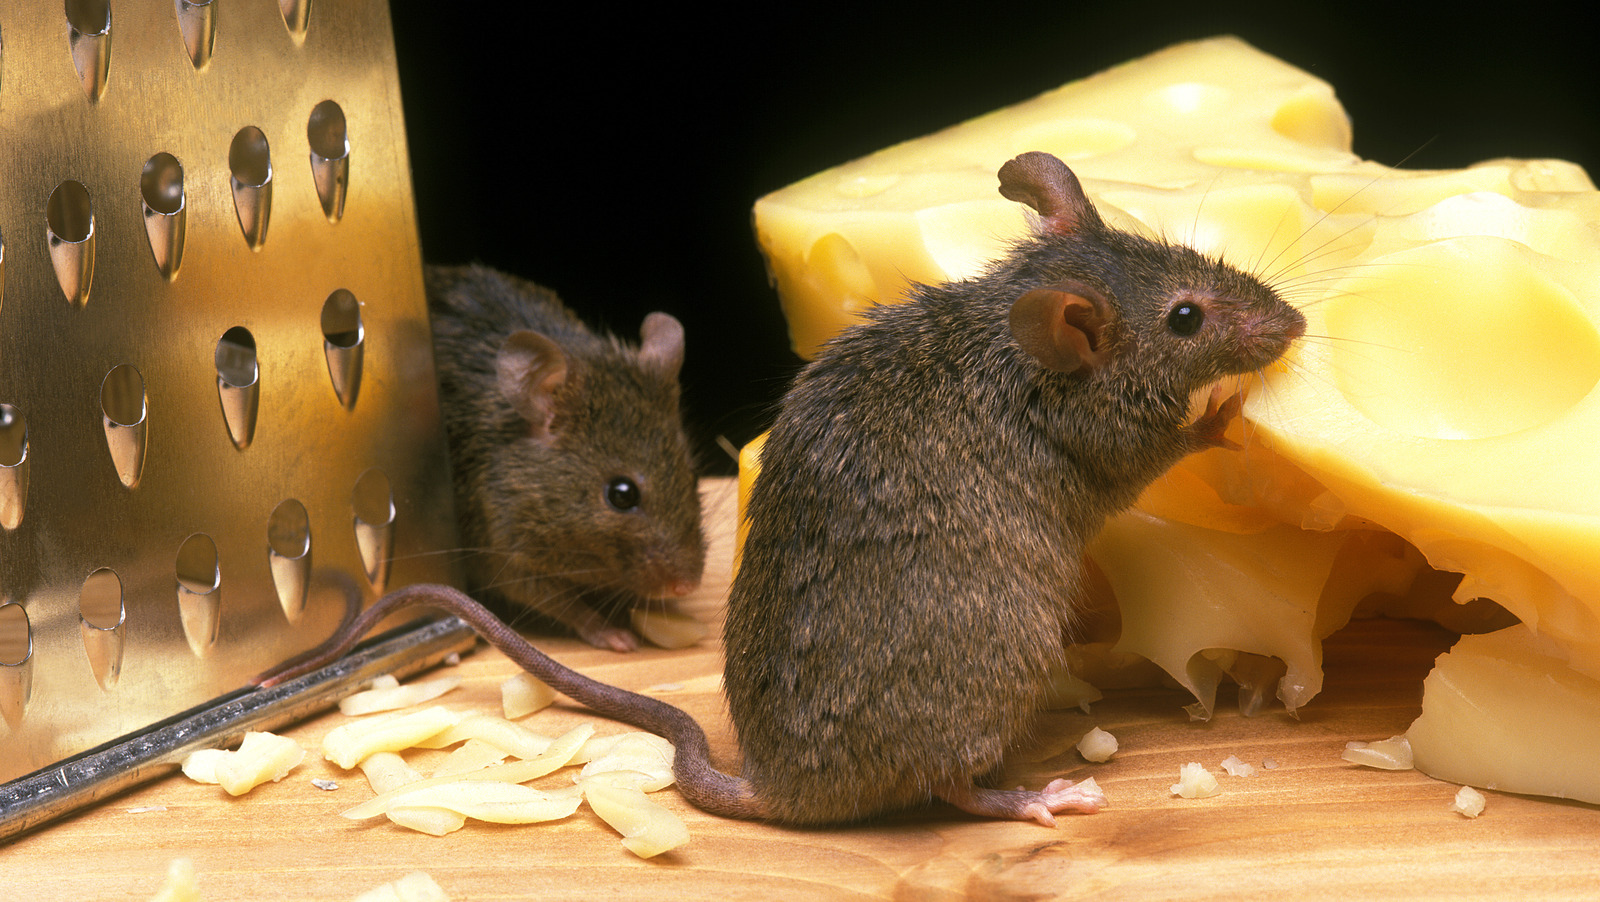 How to get rid of mice when mouse traps don't work